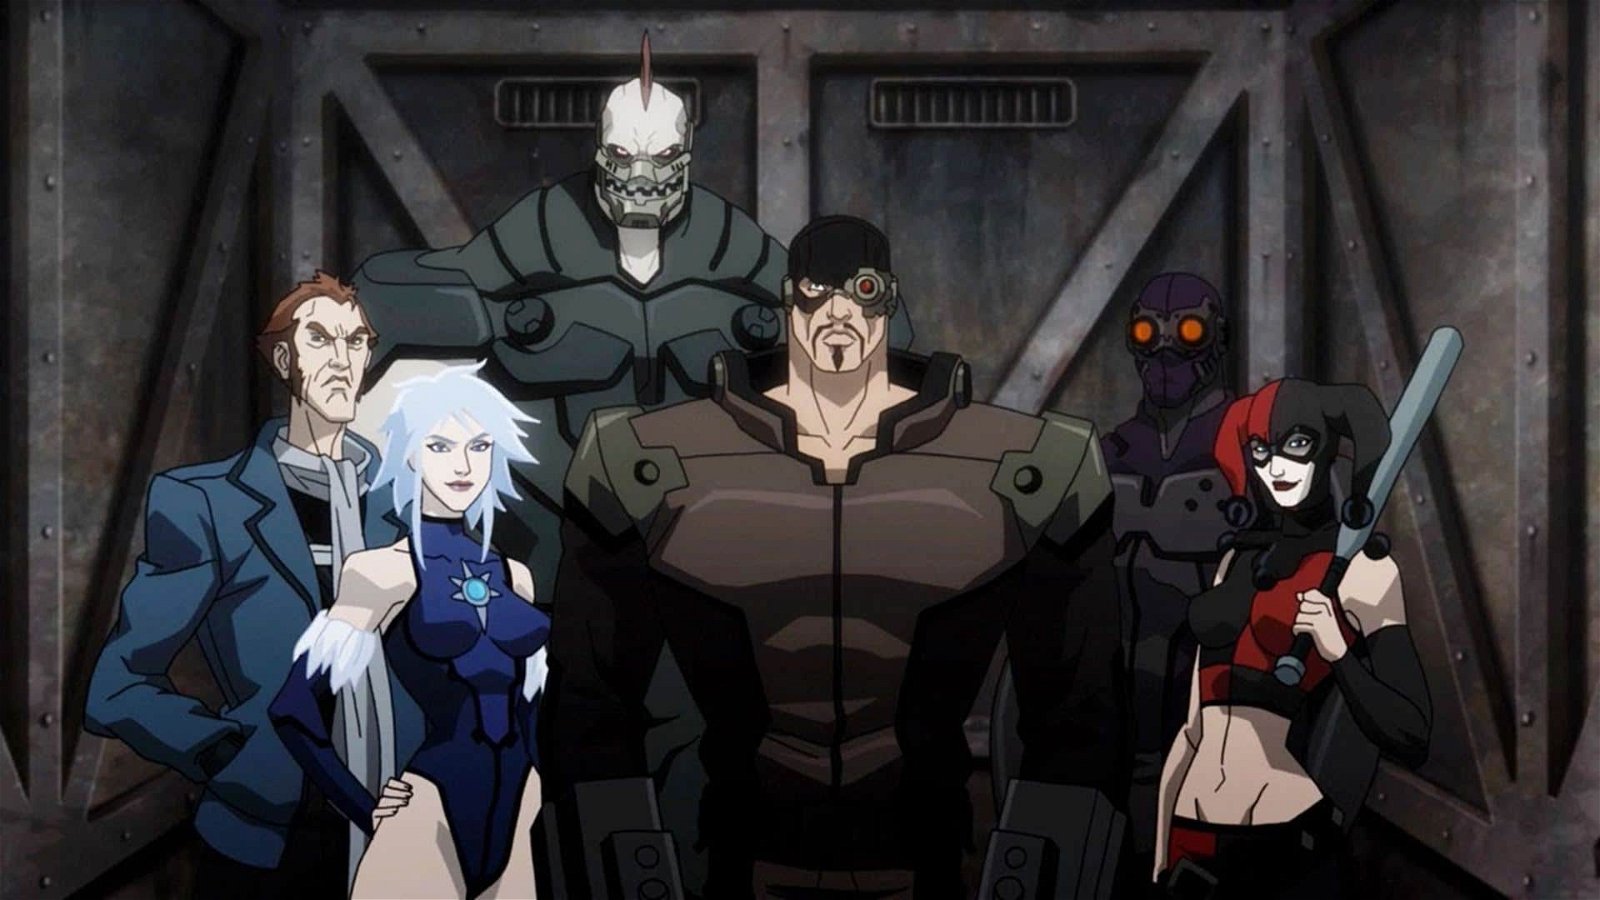 Suicide Squad: Kill the Justice League revealed at DC FanDome